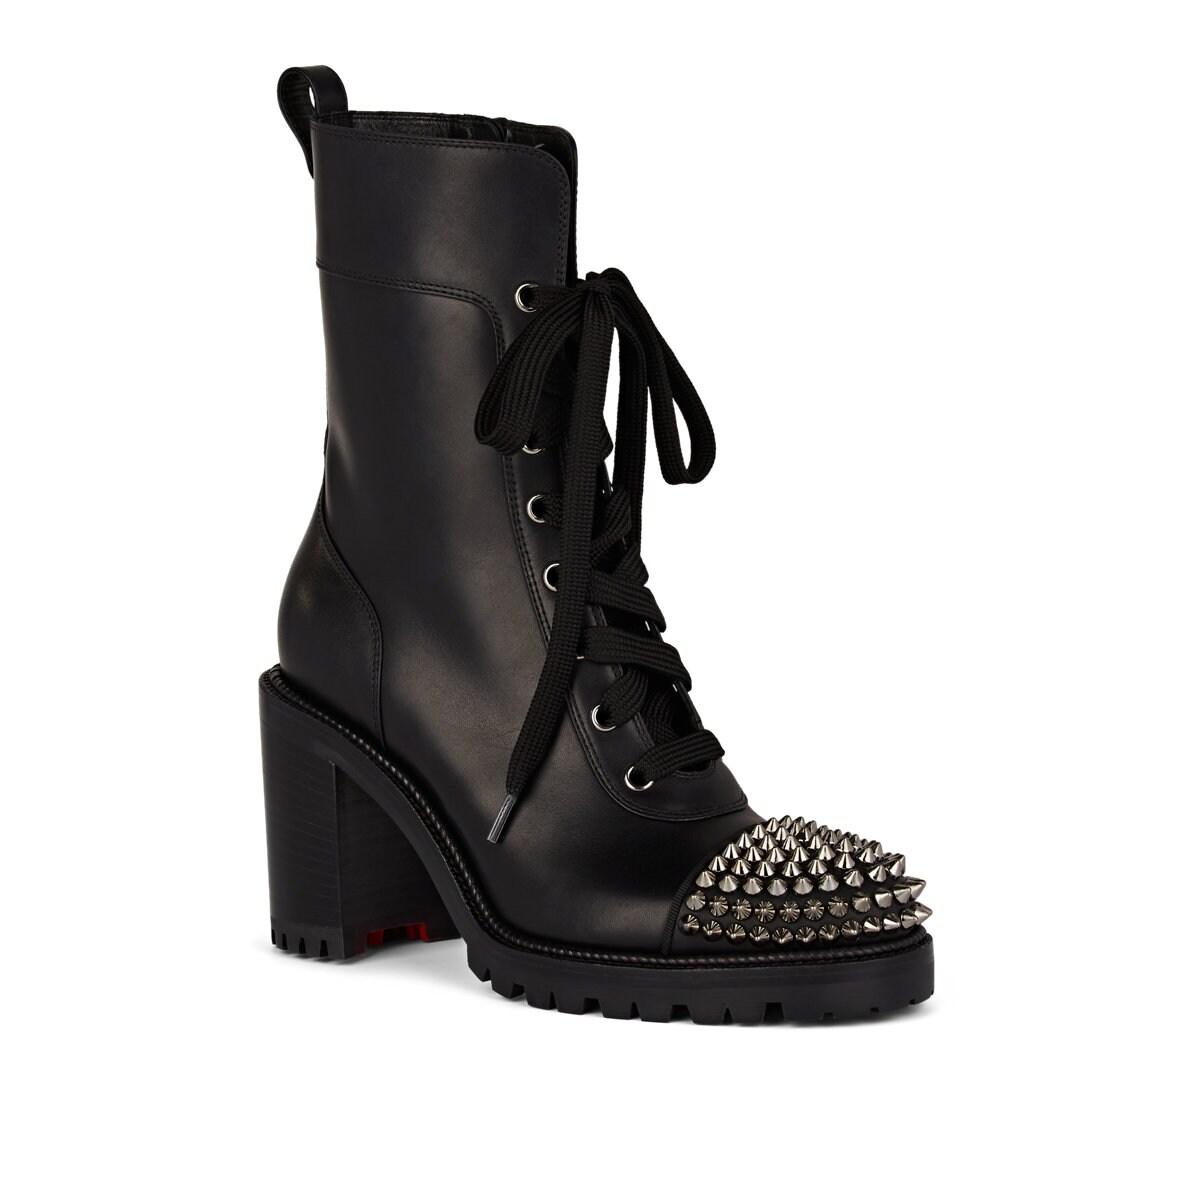 Christian Louboutin Studded Cap-toe Leather Ankle Boots in Black - Lyst